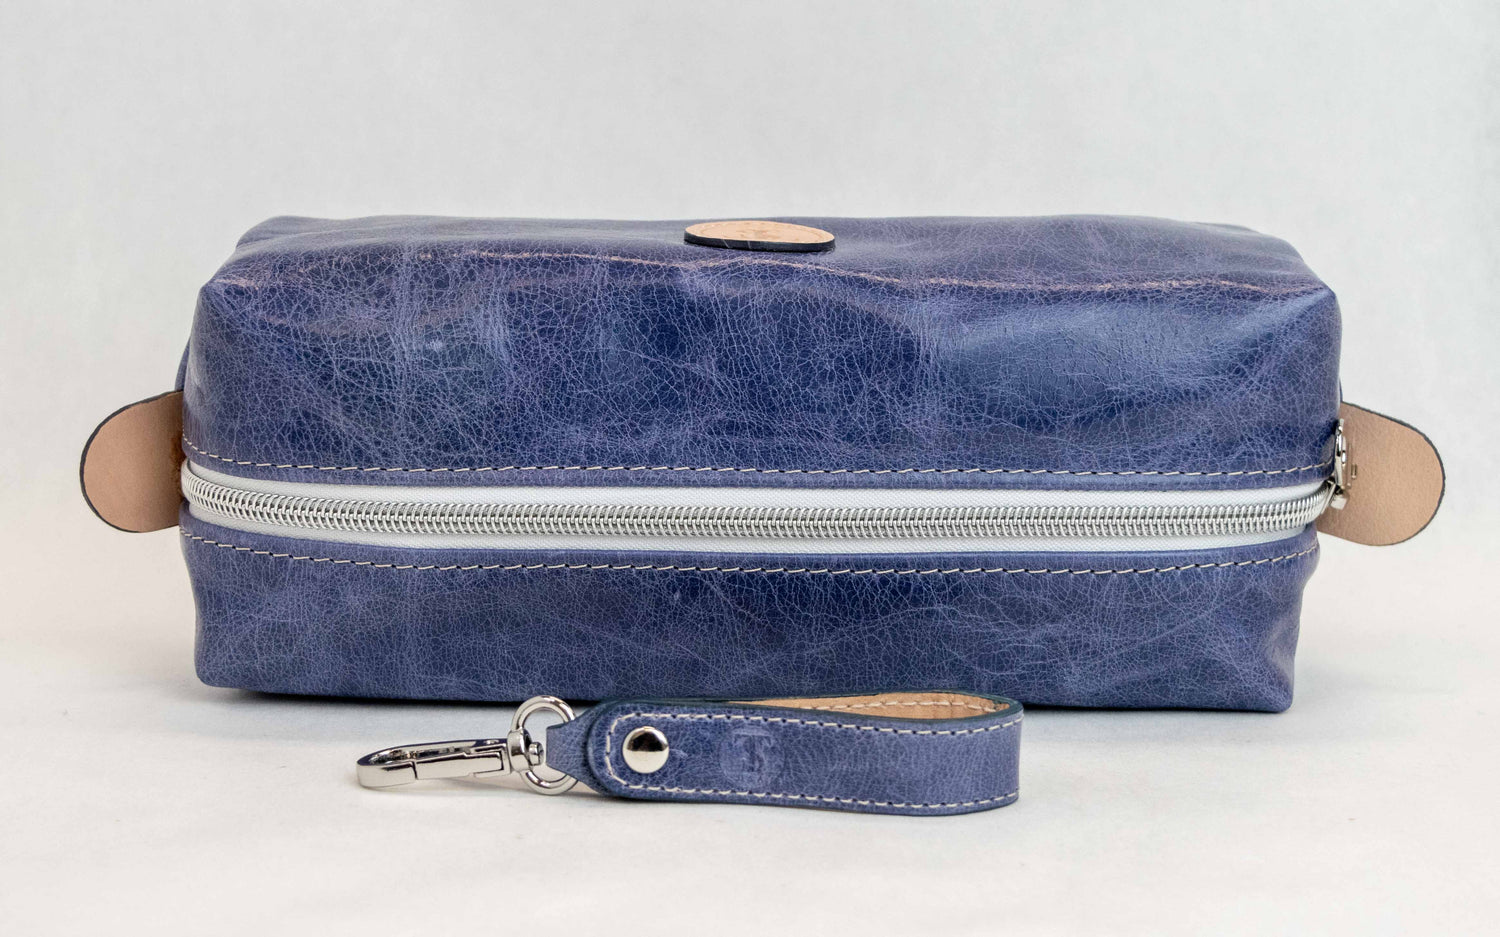 Top view of T5 bath dopp kit toiletry wash bag designer handcrafted of smooth calf leather in Atlantic denim blue